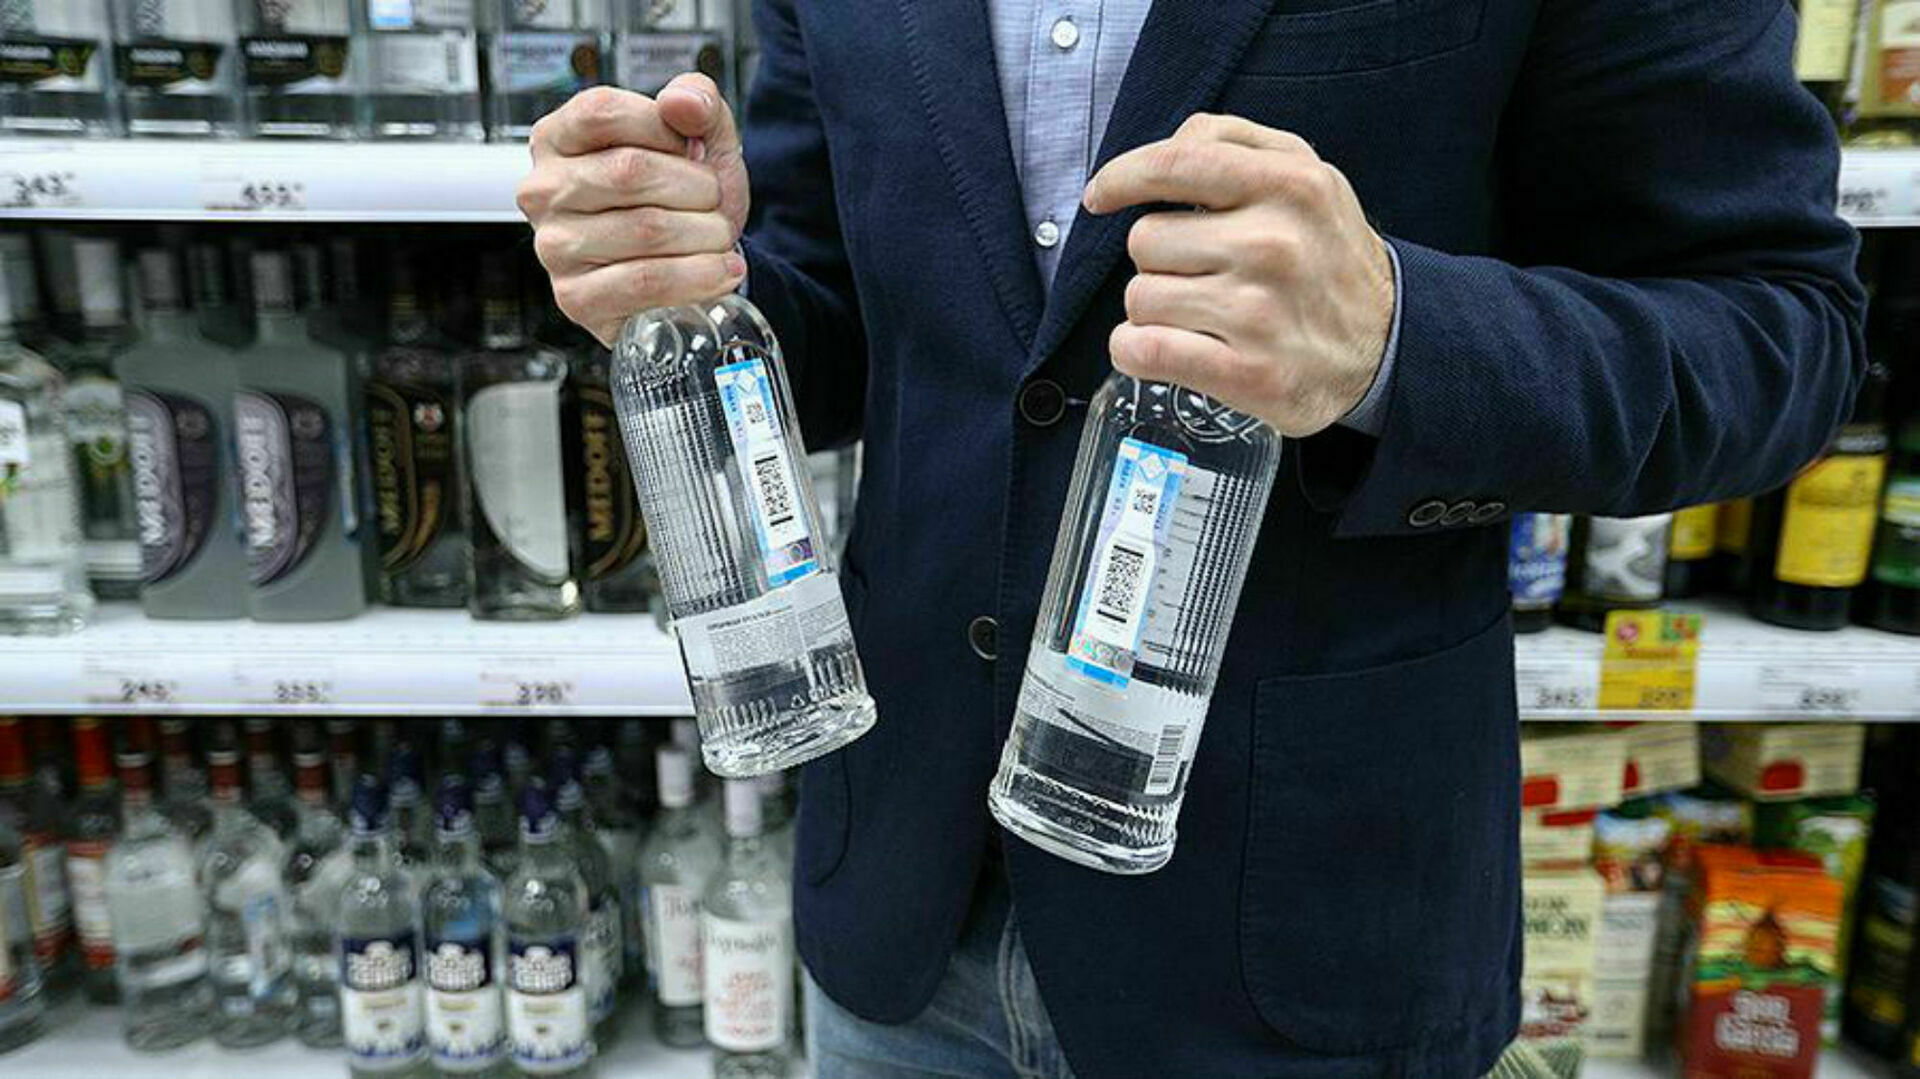 Vodka sales decreased by 4% in the first half of 2021